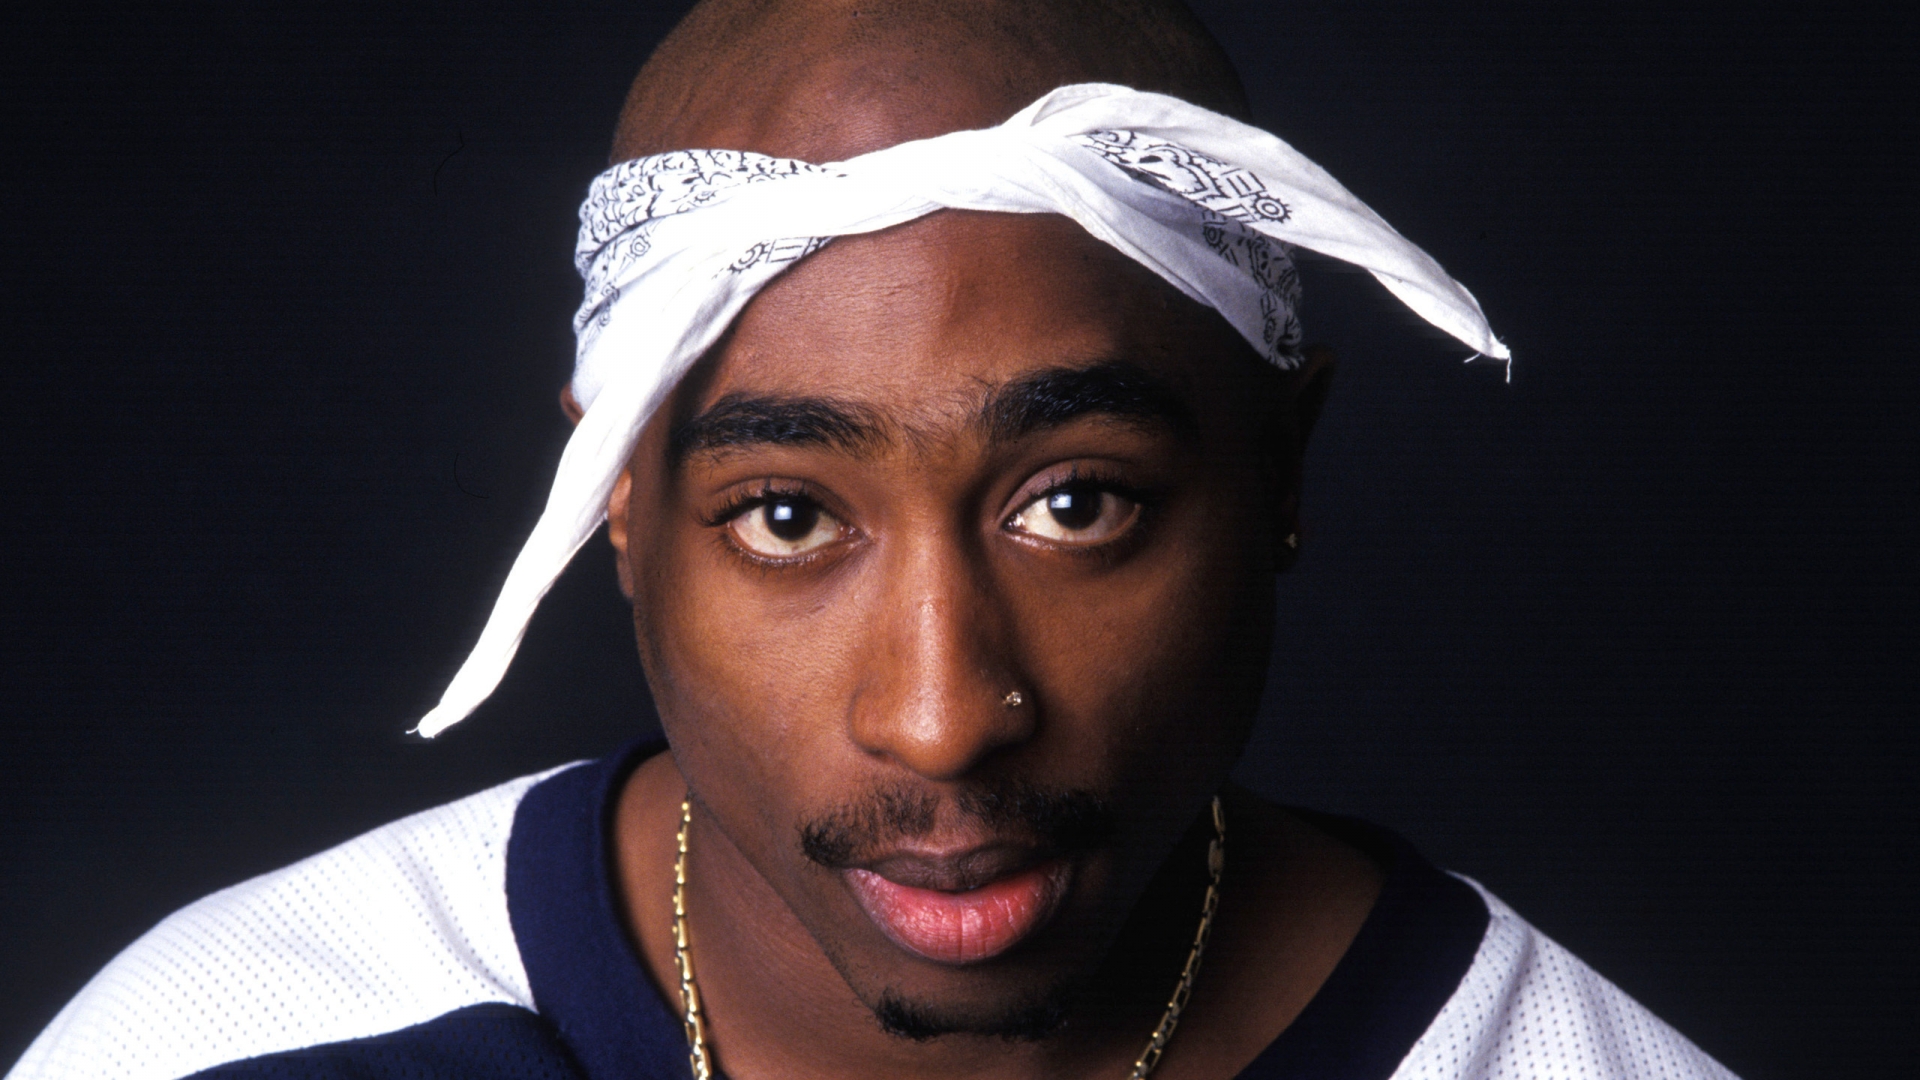 2Pac for 1920 x 1080 HDTV 1080p resolution